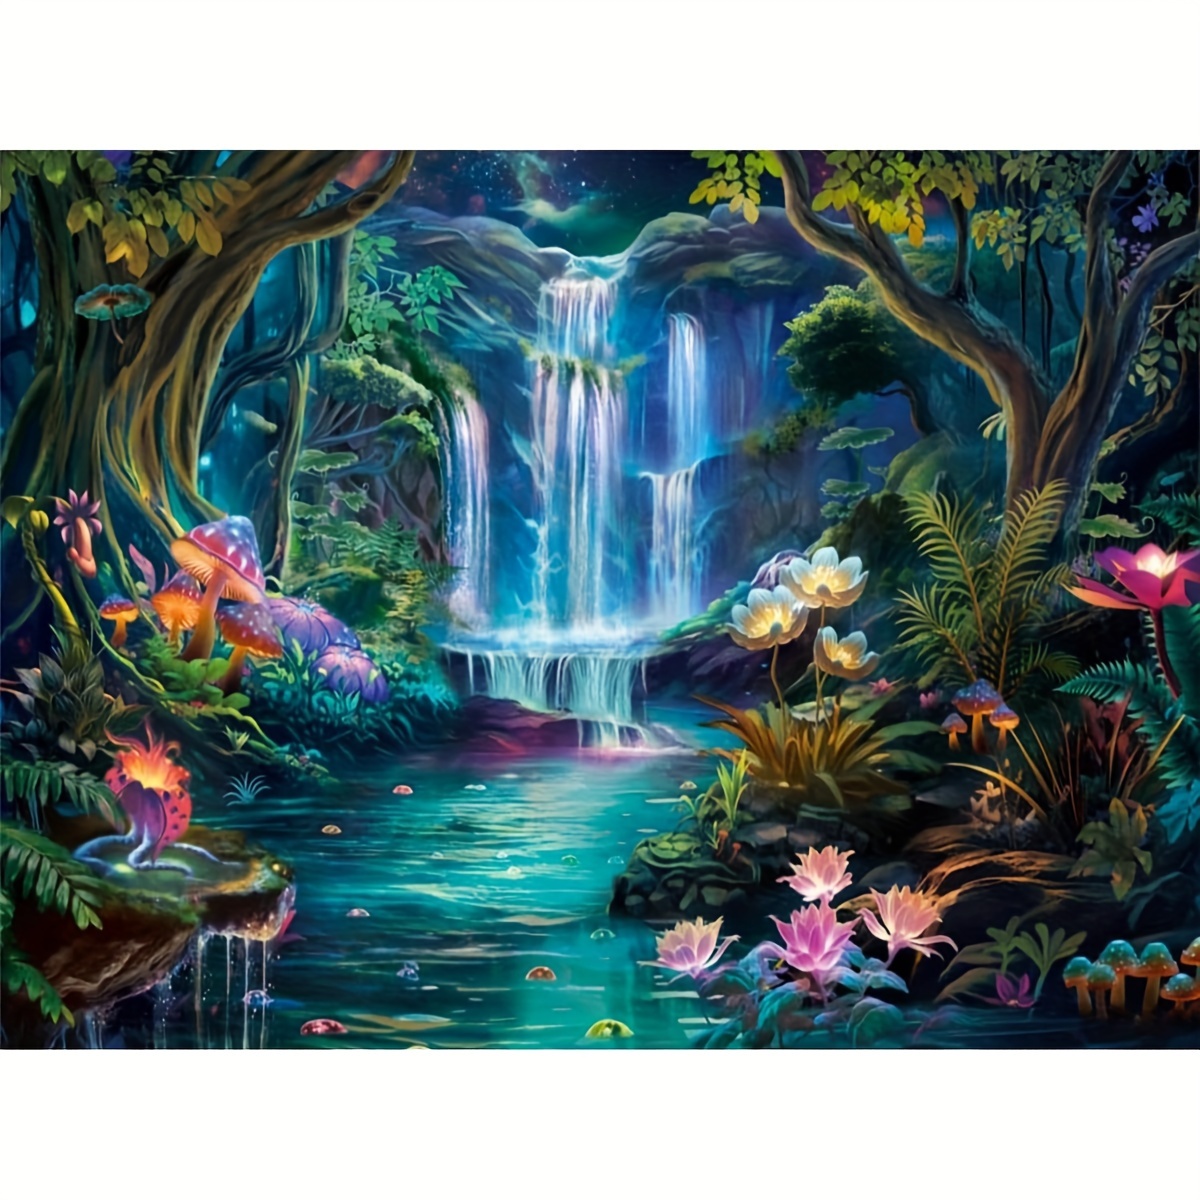 

Paint By Numbers Kit For Adults, Forest Waterfall Diy Paint By Numbers Kit For Adults, Art For Home Wall Decor 15.7 * 19.7 Inch